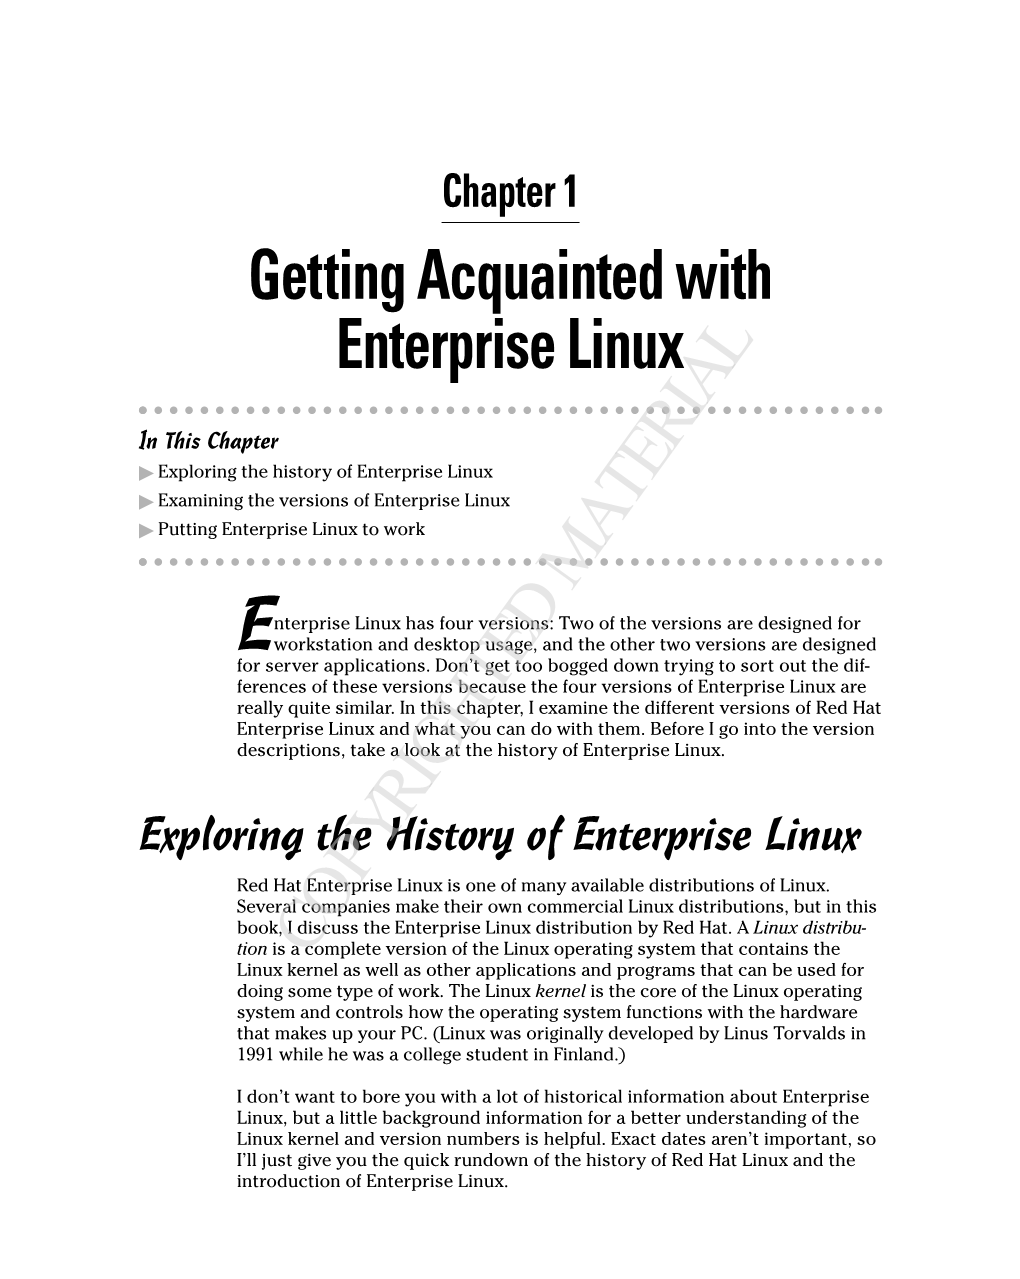 Getting Acquainted with Enterprise Linux